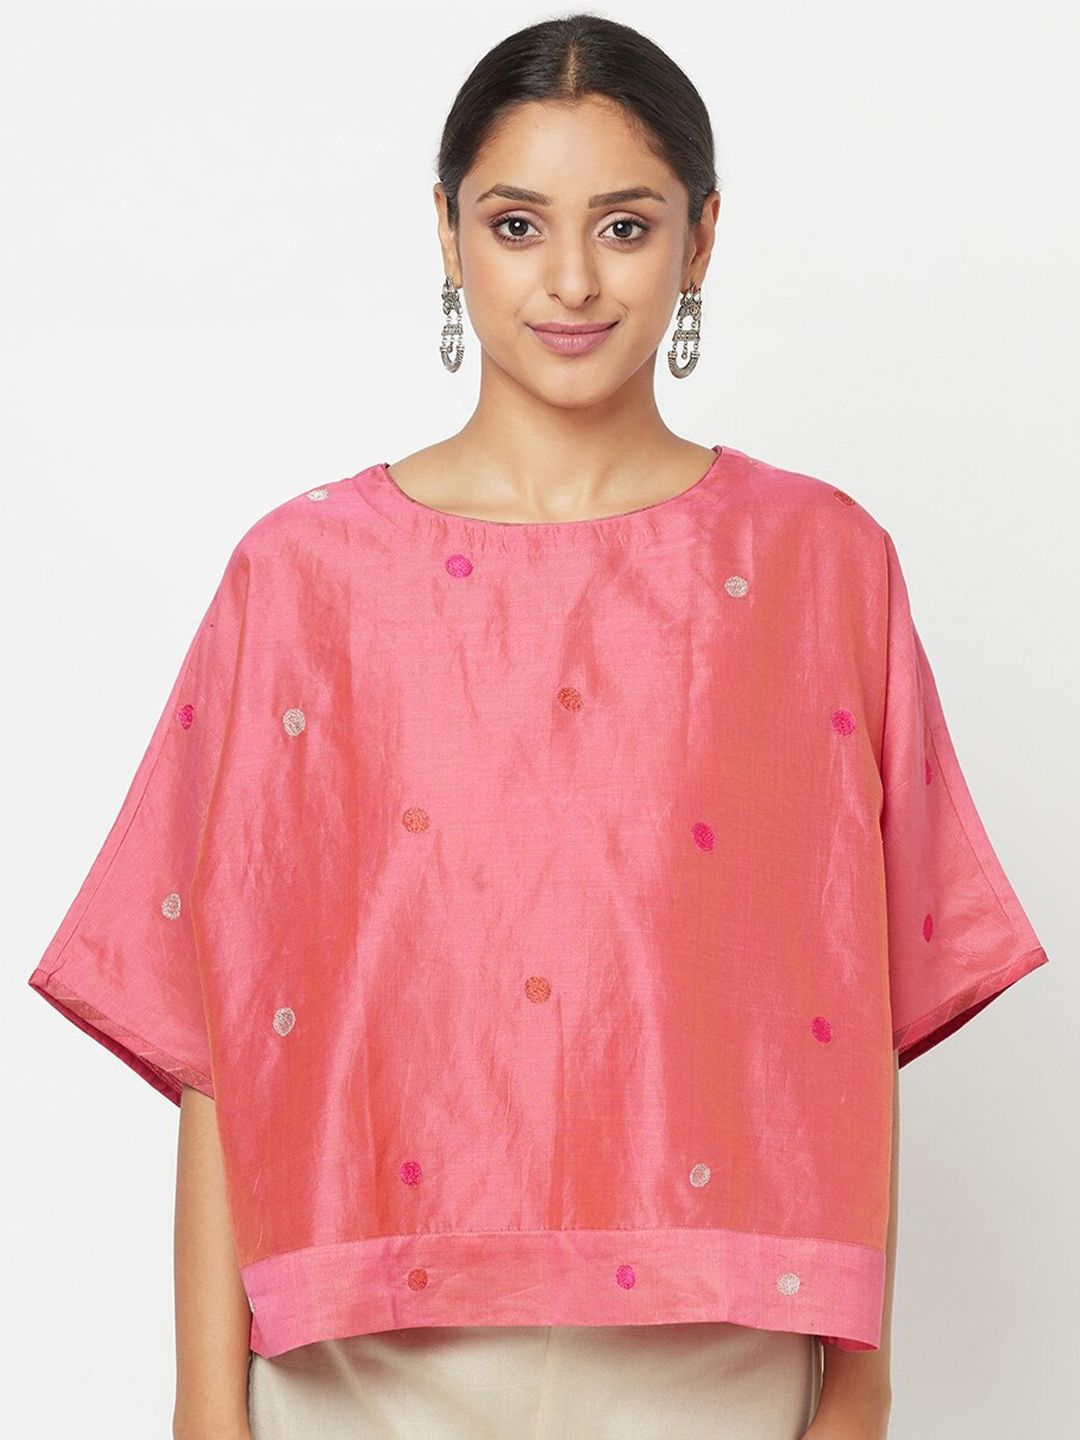 Fabindia Pink Embroidered Extended Sleeves Top Price in India